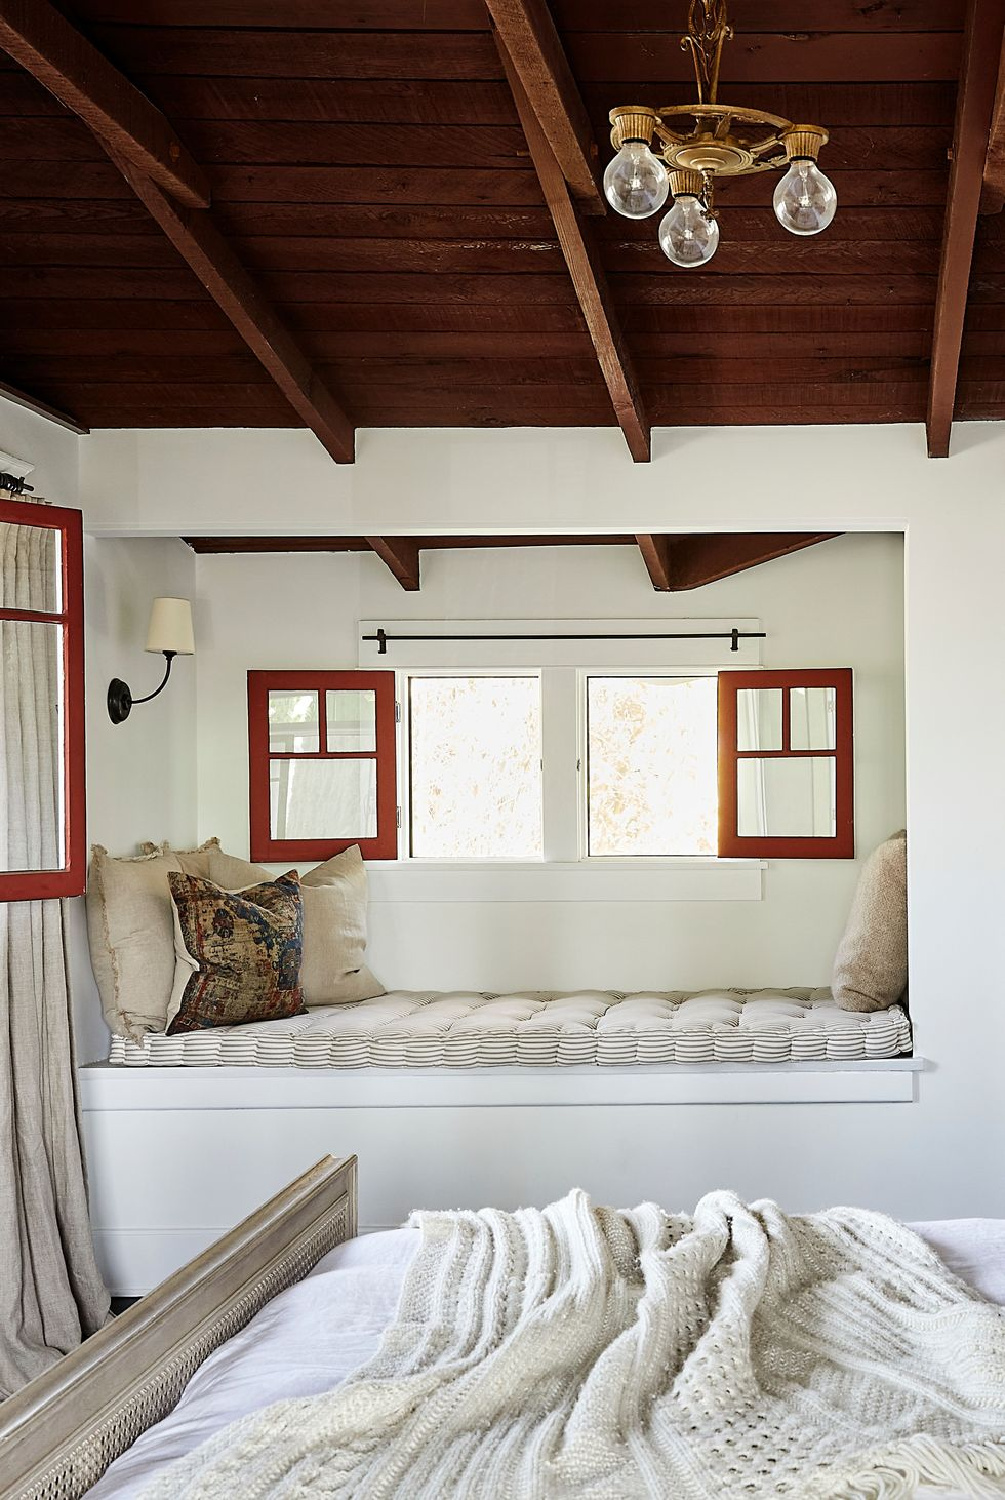 Benjamin Moore Chantilly Lace in a cozy bedroom with window seat and wood ceiling - Jamie Haller design. House Beautiful - Photo: Jenna Ohtemus Peffley. #chantillylace